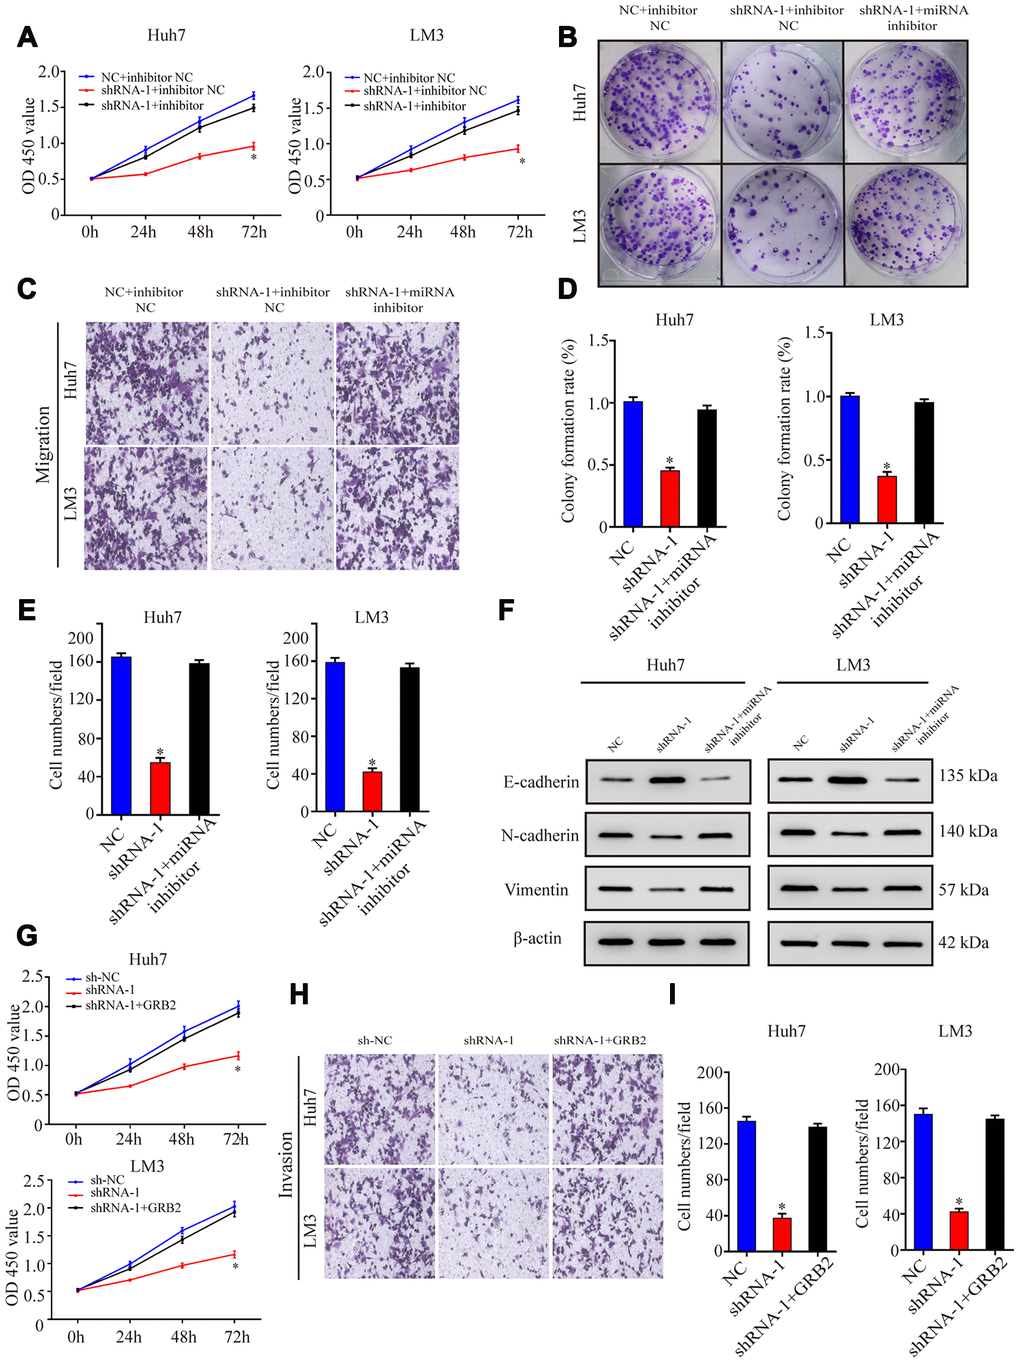 AC092171.4 promotes proliferation, migration, and invasiveness of HCC cells by suppressing miR-1271-dependent downregulation of GRB2 protein translation. (A) CCK-8 assay results show proliferation of Huh-7 and LM3 cells transfected with sh-NC, sh-AC092171.4, sh-NC plus miR-1271 inhibitor, or sh-AC092171.4 plus miR-1271 inhibitor. (B) Colony formation assays show the numbers of colonies formed by Huh-7 cells transfected with sh-NC, sh-AC092171.4, sh-NC plus miR-1271 inhibitor, or sh-AC092171.4 plus miR-1271 inhibitor. (C) Transwell assay results show the total numbers of migratory and invasive Huh-7 cells transfected with sh-NC, sh-AC092171.4, sh-NC plus miR-1271 inhibitor, or sh-AC092171.4 plus miR-1271 inhibitor. (D) Colony formation assays show the numbers of colonies formed by LM3 cells transfected with sh-NC, sh-AC092171.4, sh-NC plus miR-1271 inhibitor, or sh-AC092171.4 plus miR-1271 inhibitor. (E) Transwell assay results show the total numbers of migratory and invasive LM3 cells transfected with sh-NC, sh-AC092171.4, sh-NC plus miR-1271 inhibitor, or sh-AC092171.4 plus miR-1271 inhibitor. (F) Western blot analysis shows relative levels of E-cadherin, N-cadherin and vimentin levels in HCC cells transfected with shRNA-AC092171.4 alone or shRNA-AC092171.4 plus miR-1271 inhibitor. (G) CCK-8 assay results show the proliferation status in AC092171.4-silenced and sh-AC092171.4-silenced plus GRB2 overexpressing Huh7and LM3 cells. (H, I) Transwell assay results show the migration status of AC092171.4-silenced and sh-AC092171.4-silenced plus GRB2 overexpressing Huh7and LM3 cells. * denotes p